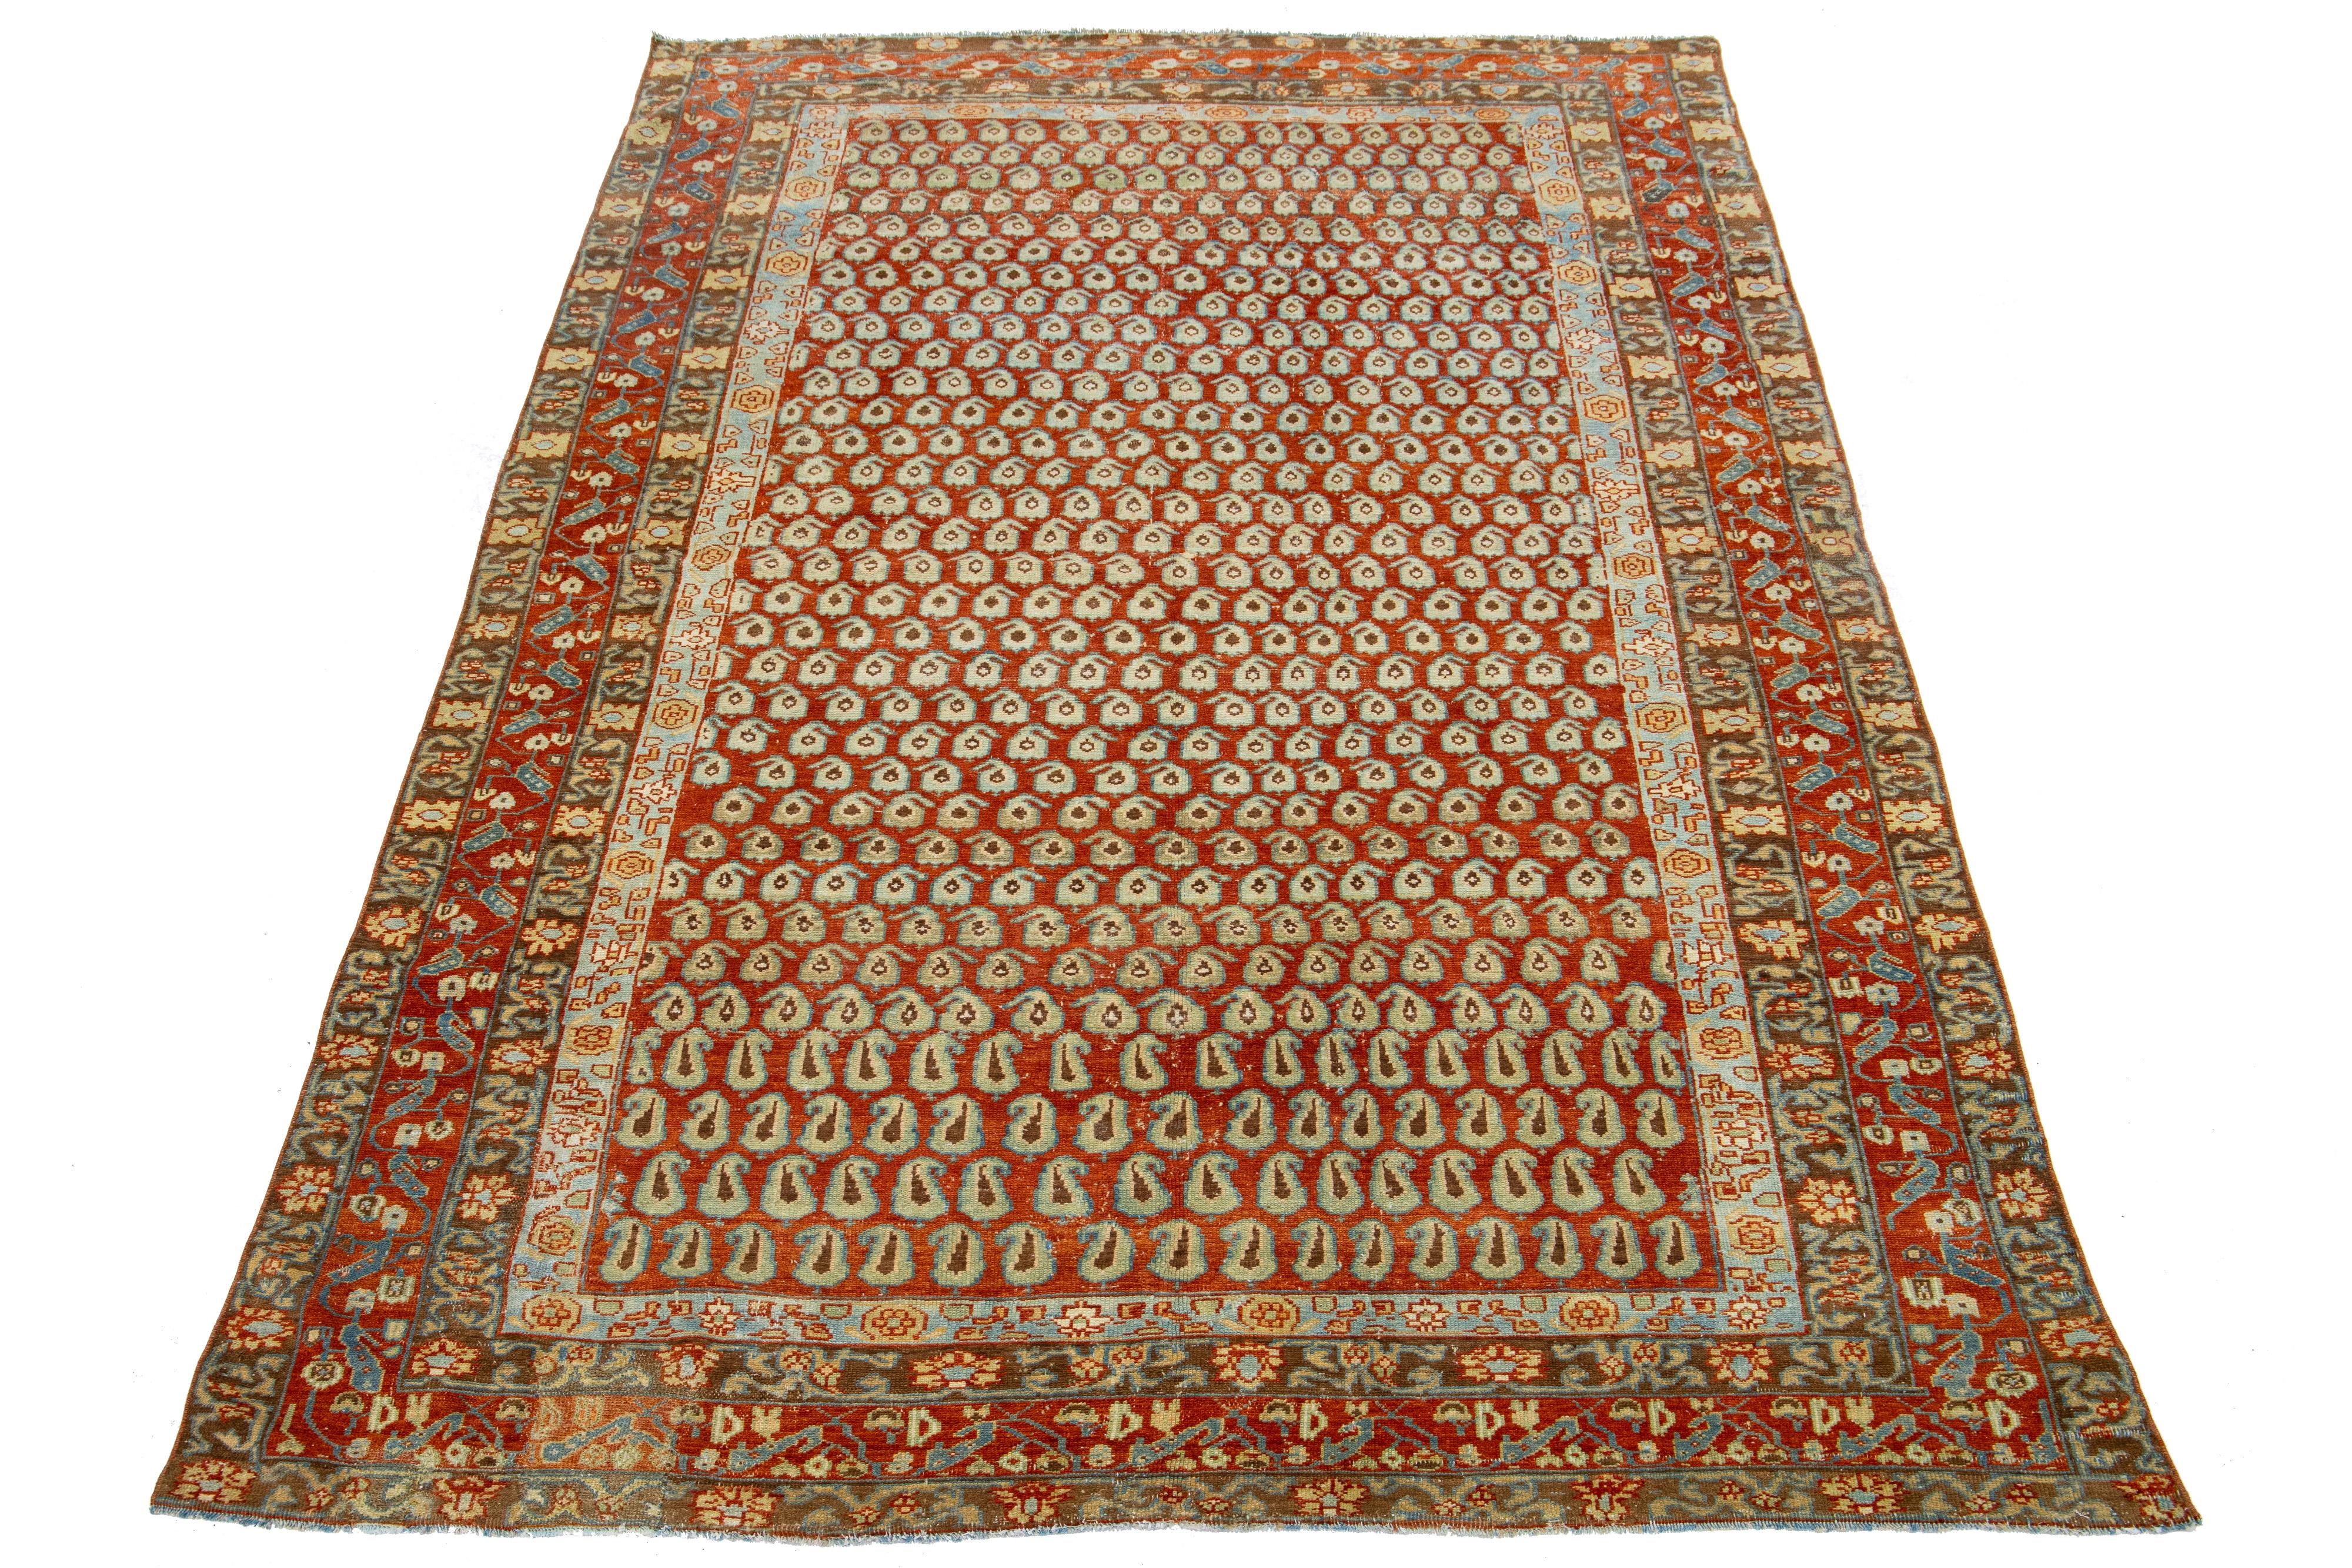 This exquisite antique Hamadan rug is hand-knotted from premium wool, boasting a red-rust field complemented by a captivating, all-over pattern design enriched with peach and blue accents.

This rug measures 6'3